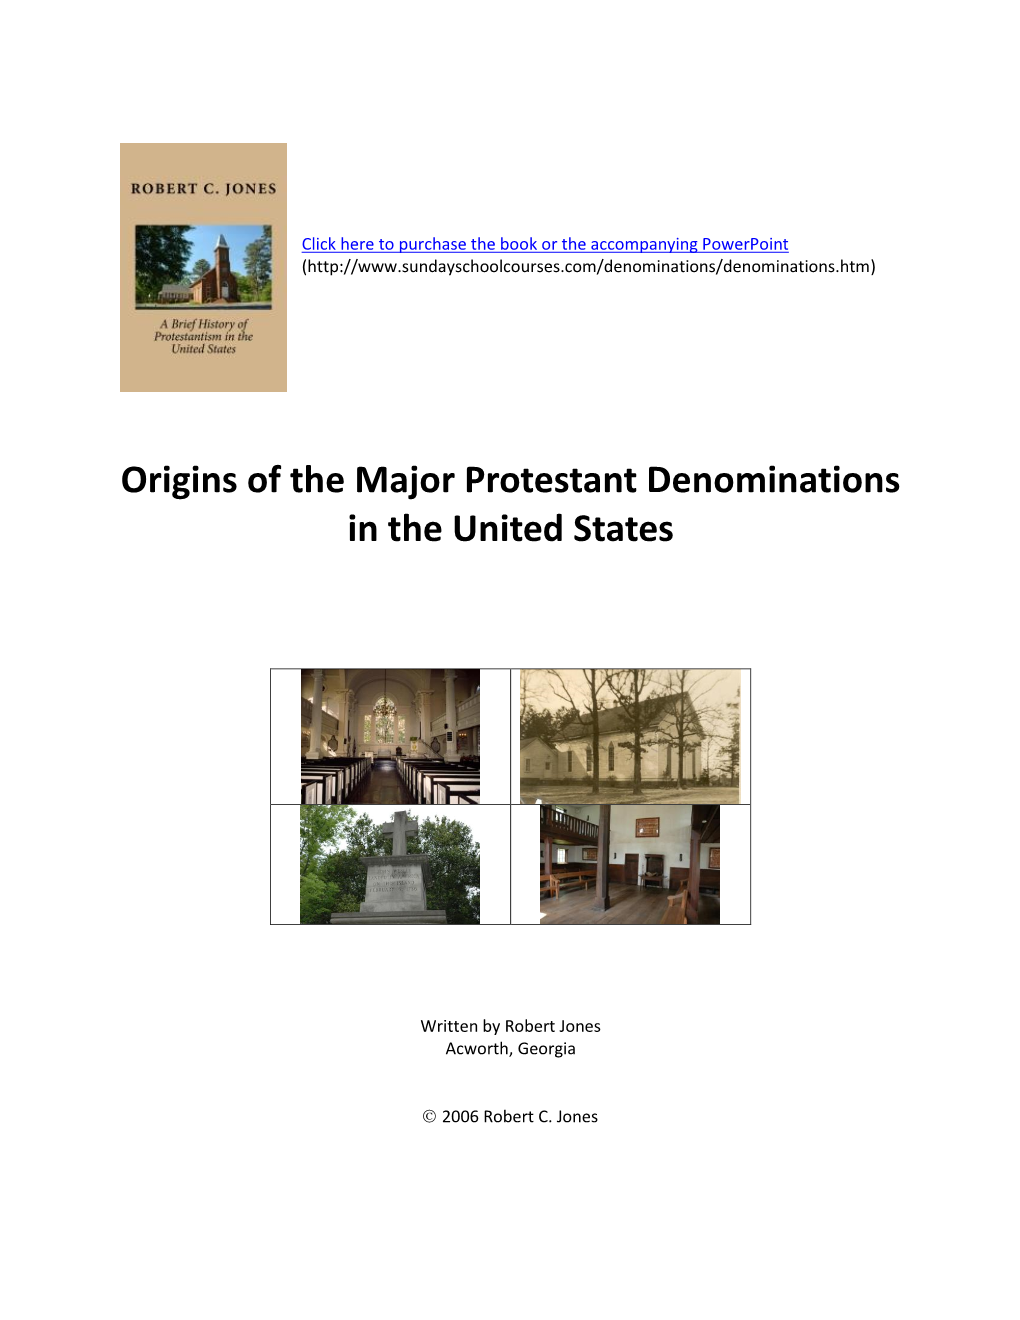 Protestant Denominations in the United States